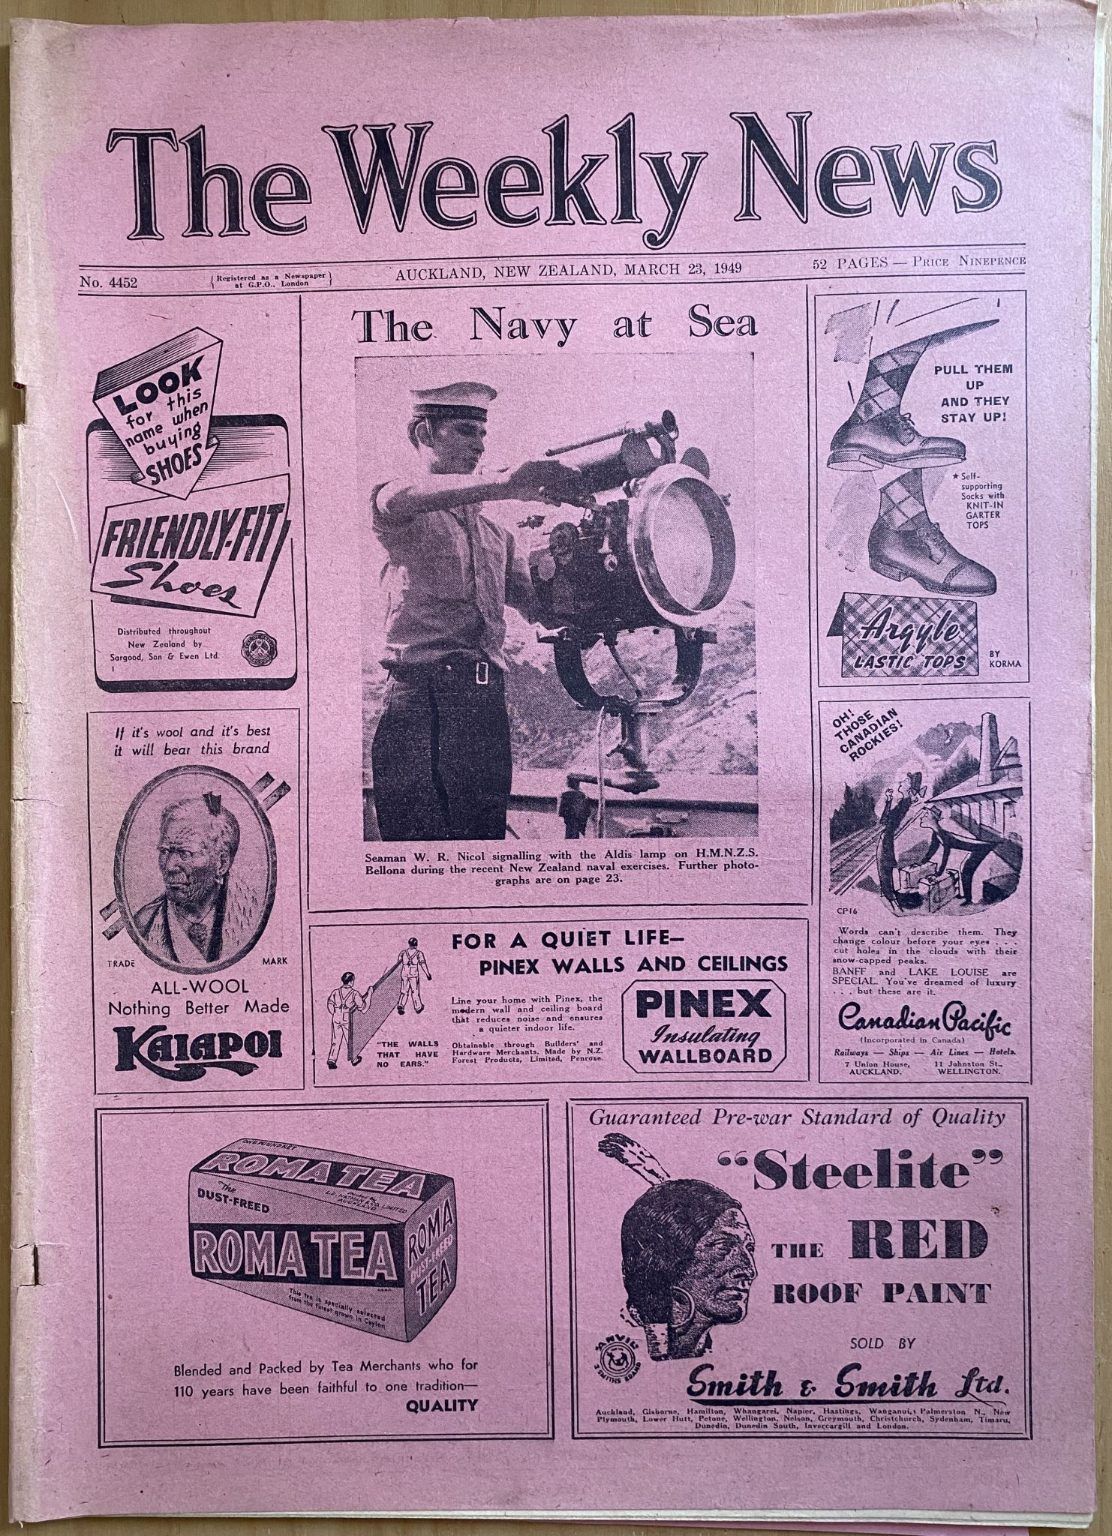 OLD NEWSPAPER: The Weekly News, No. 4452, 23 March 1949